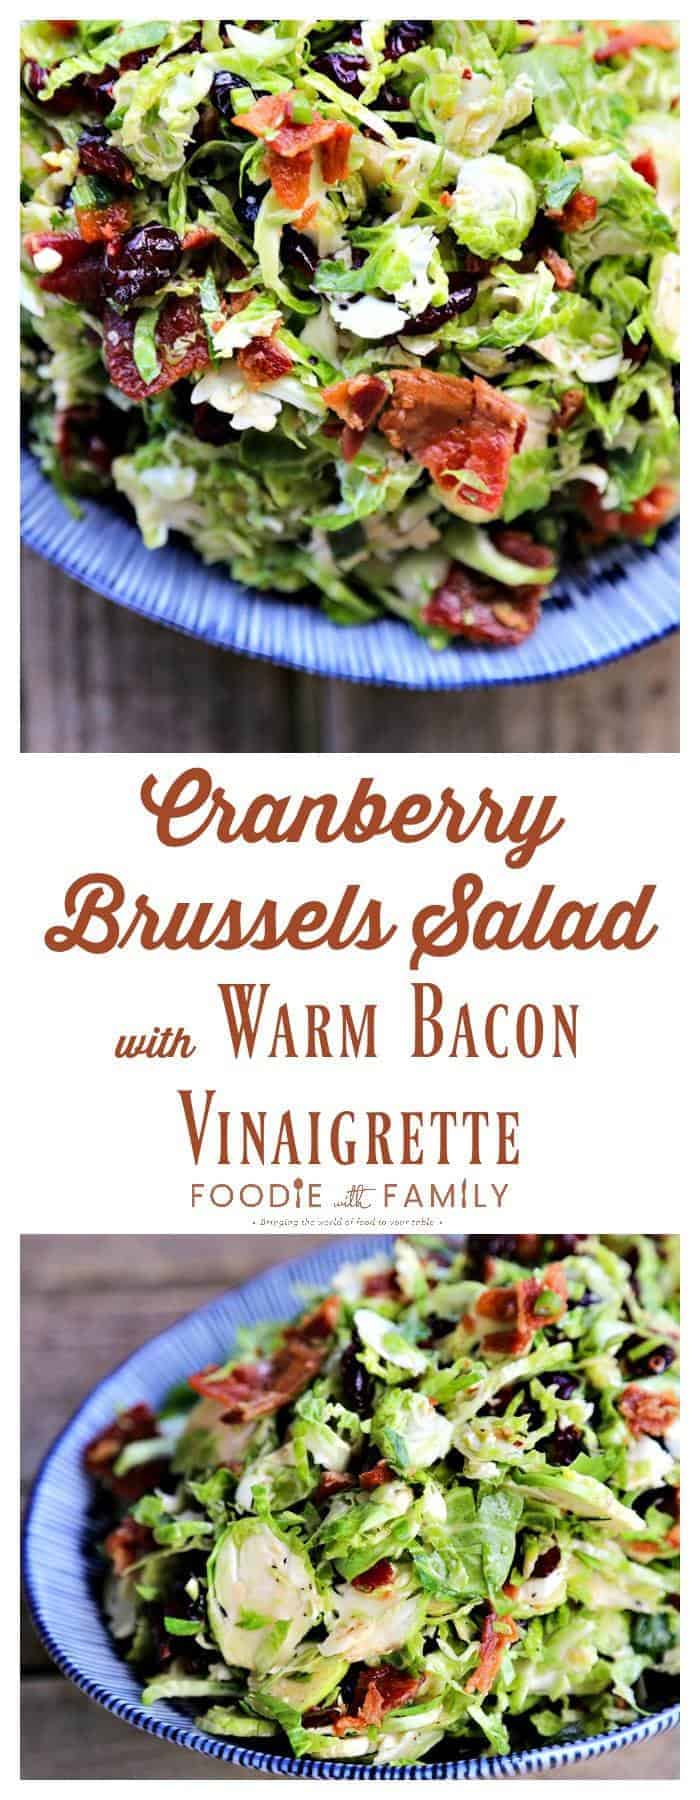 Cranberry Brussels Salad with Bacon Vinaigrette: crisp-tender Brussels sprouts with tart, sweet dried cranberries and a warm bacon, green onion vinaigrette.